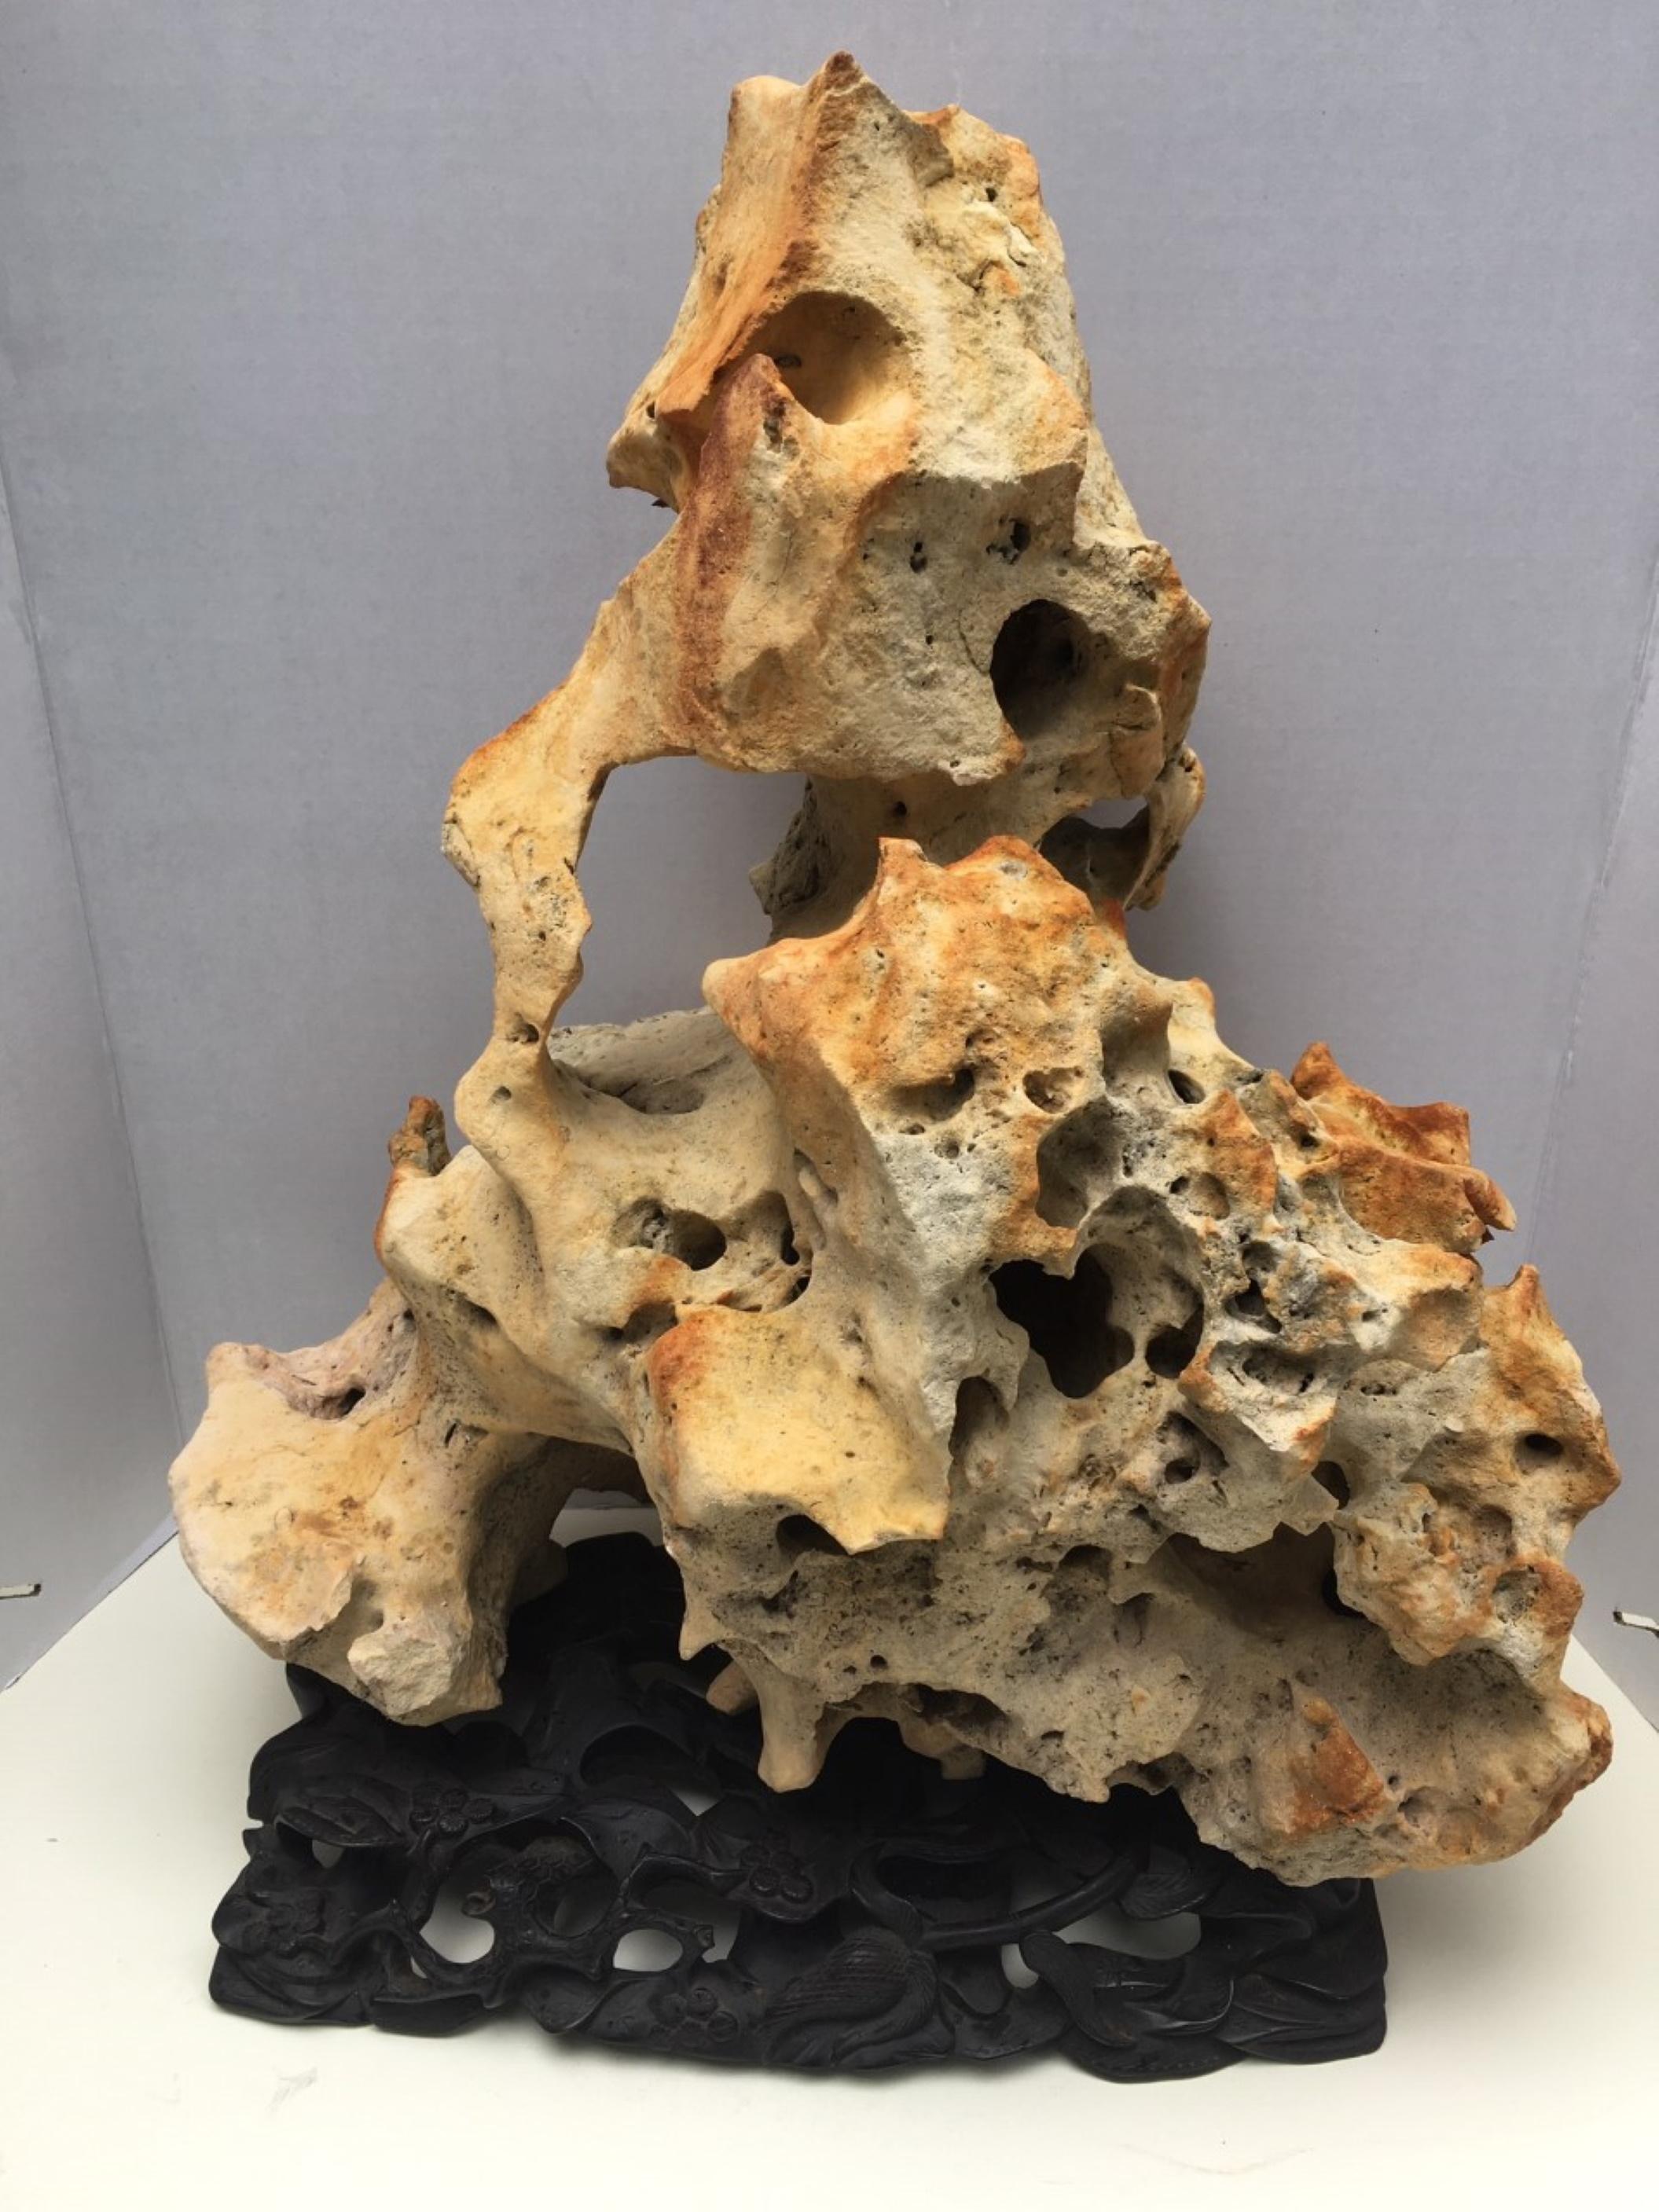 Fine large Chinese Taihu scholar limestone rock

This fantastically shaped limestone is prized for its dramatic beauty of natural perforations and textured surfaces. The Taihu scholar rock is a naturally occurring limestone specimen and it comes